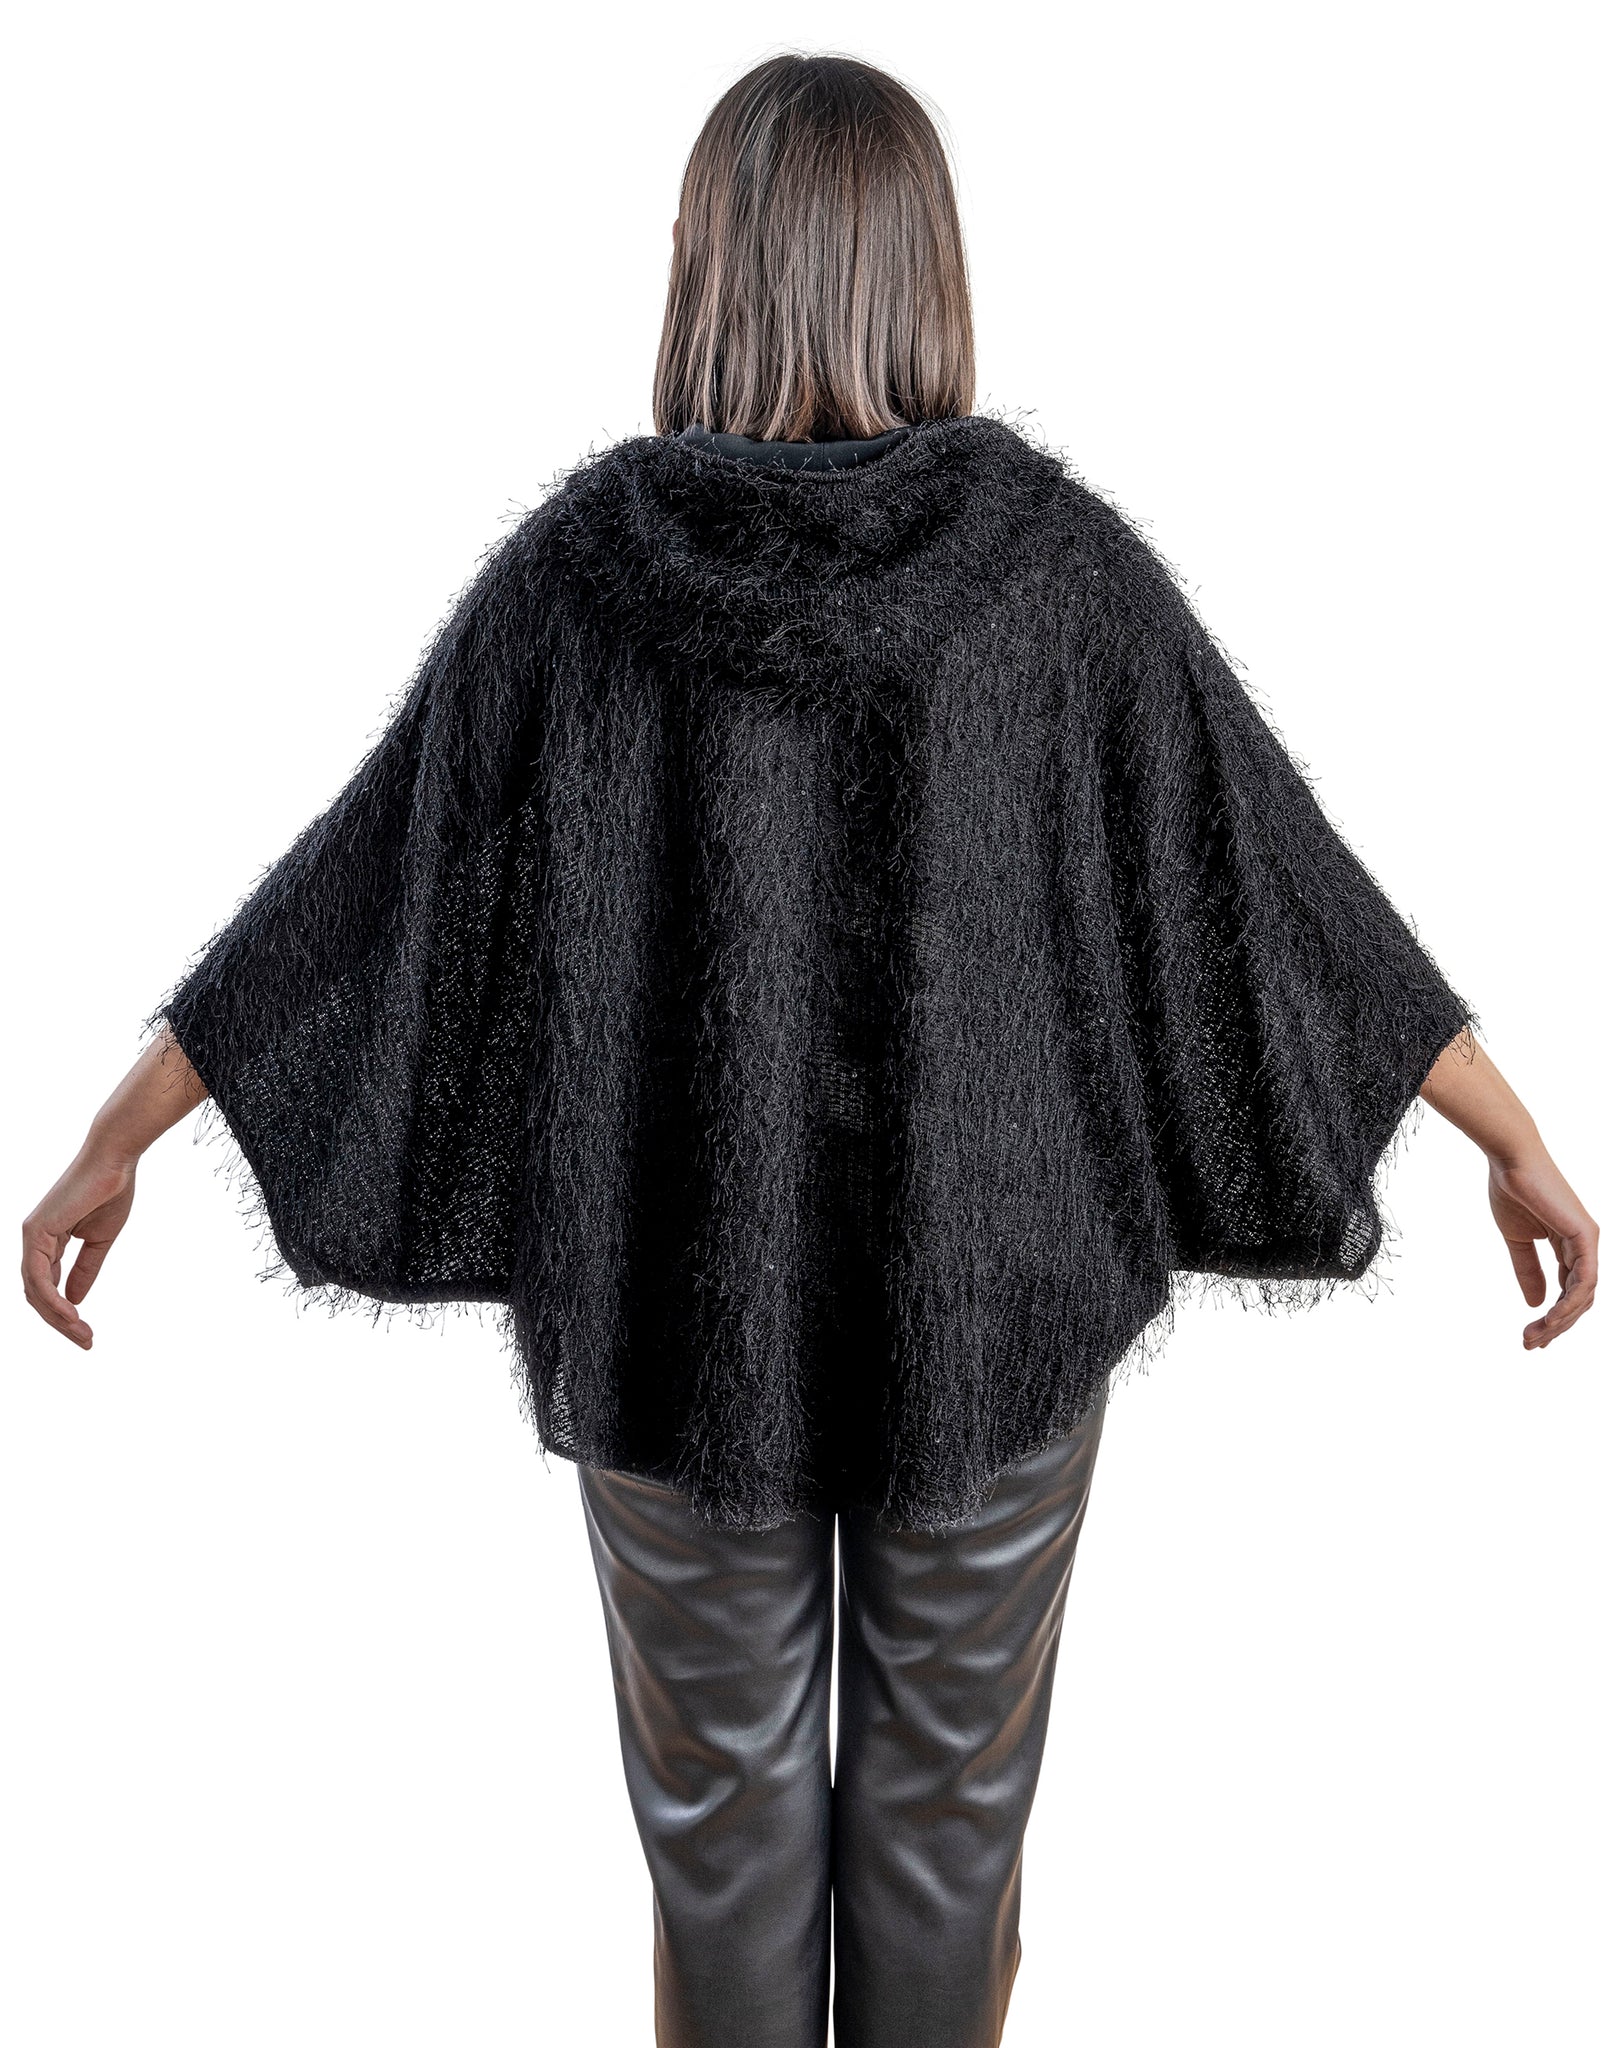 Finely tassled black hooded Poncho